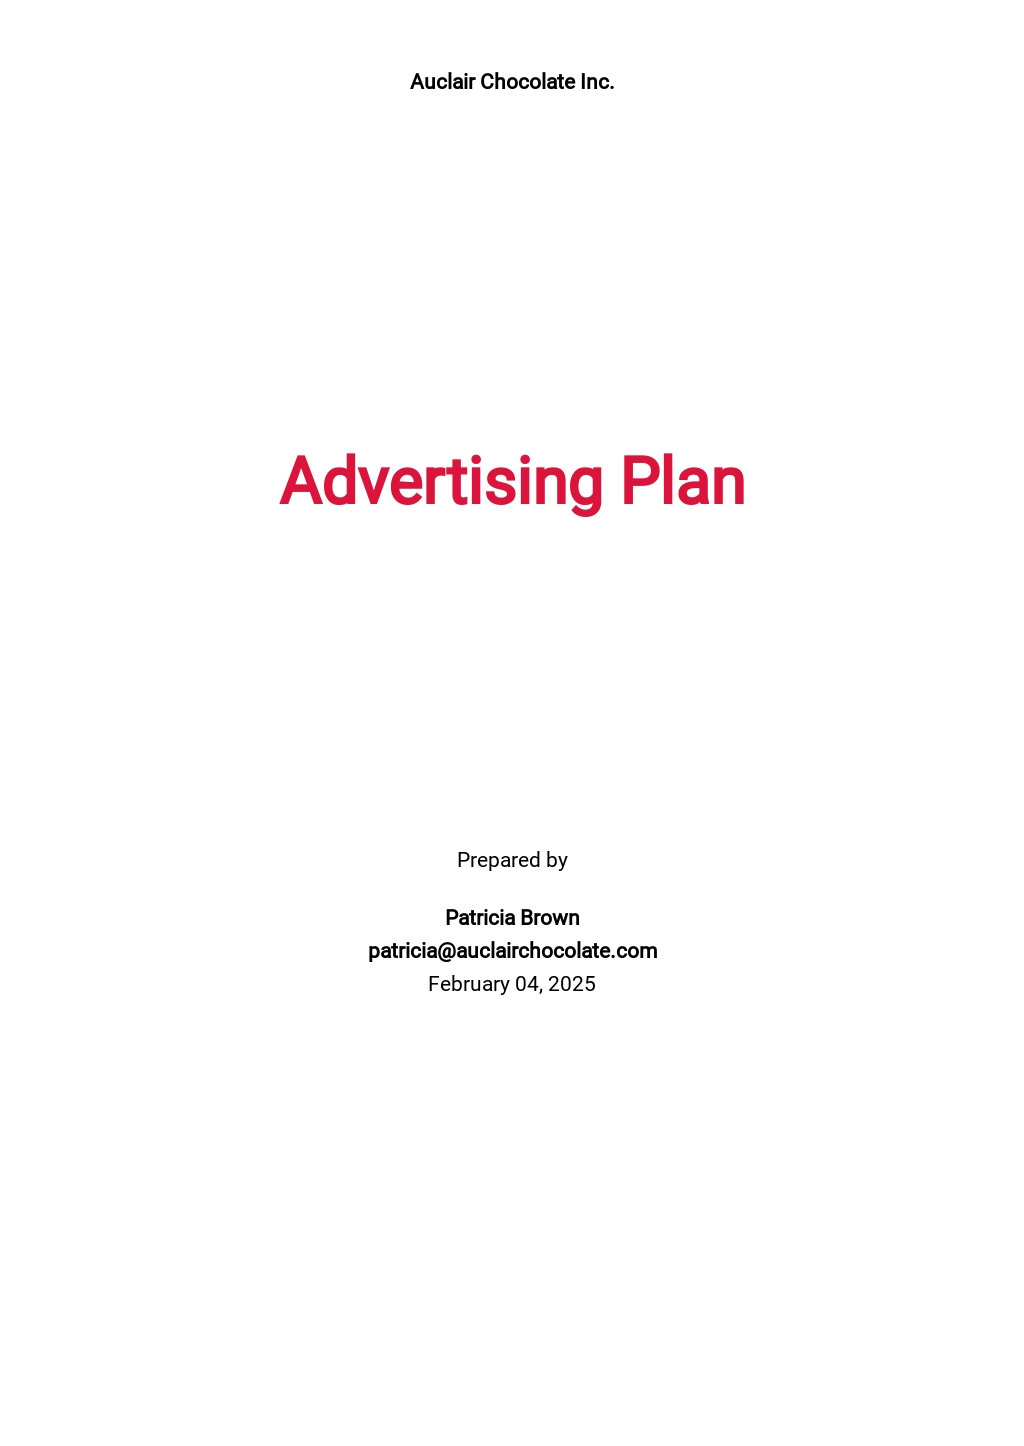 Advertising Plan Template - Google Docs, Word, Apple Pages, PDF